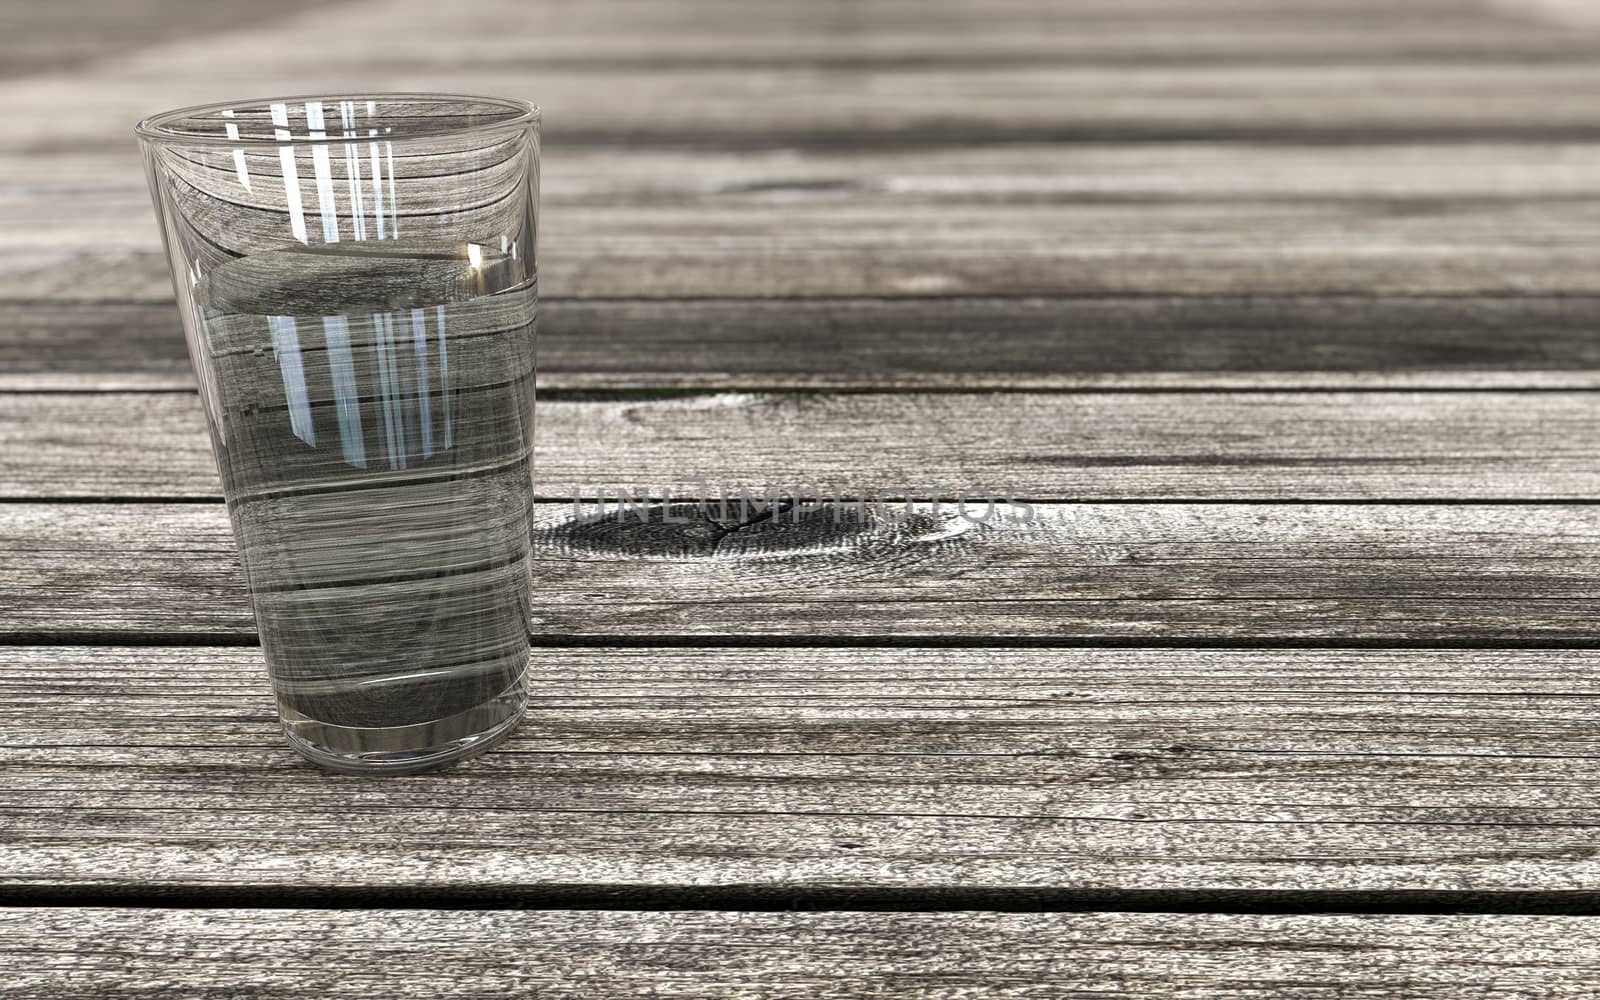 Glass of Water on a wooden table perspective background by F1b0nacci